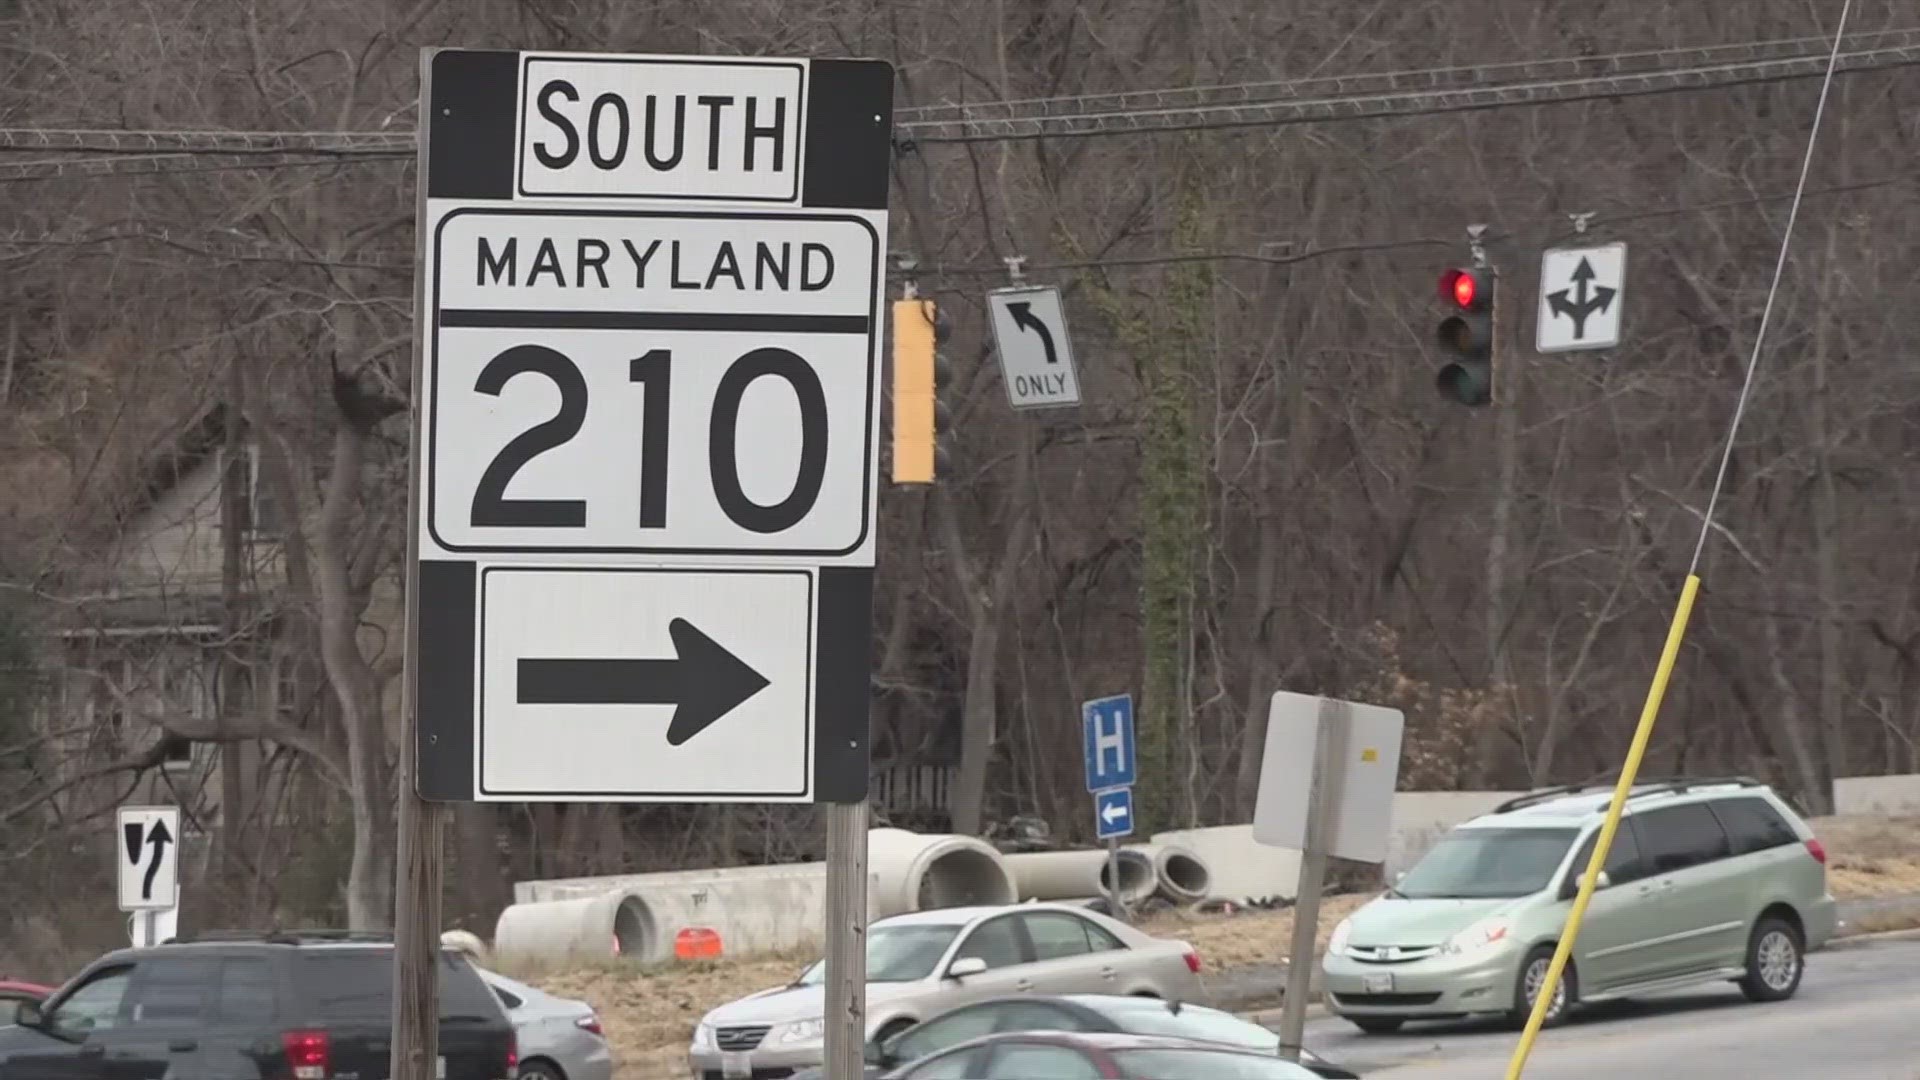 Grassroots activists are pushing to make MD-210 safer for drivers. Here's how.